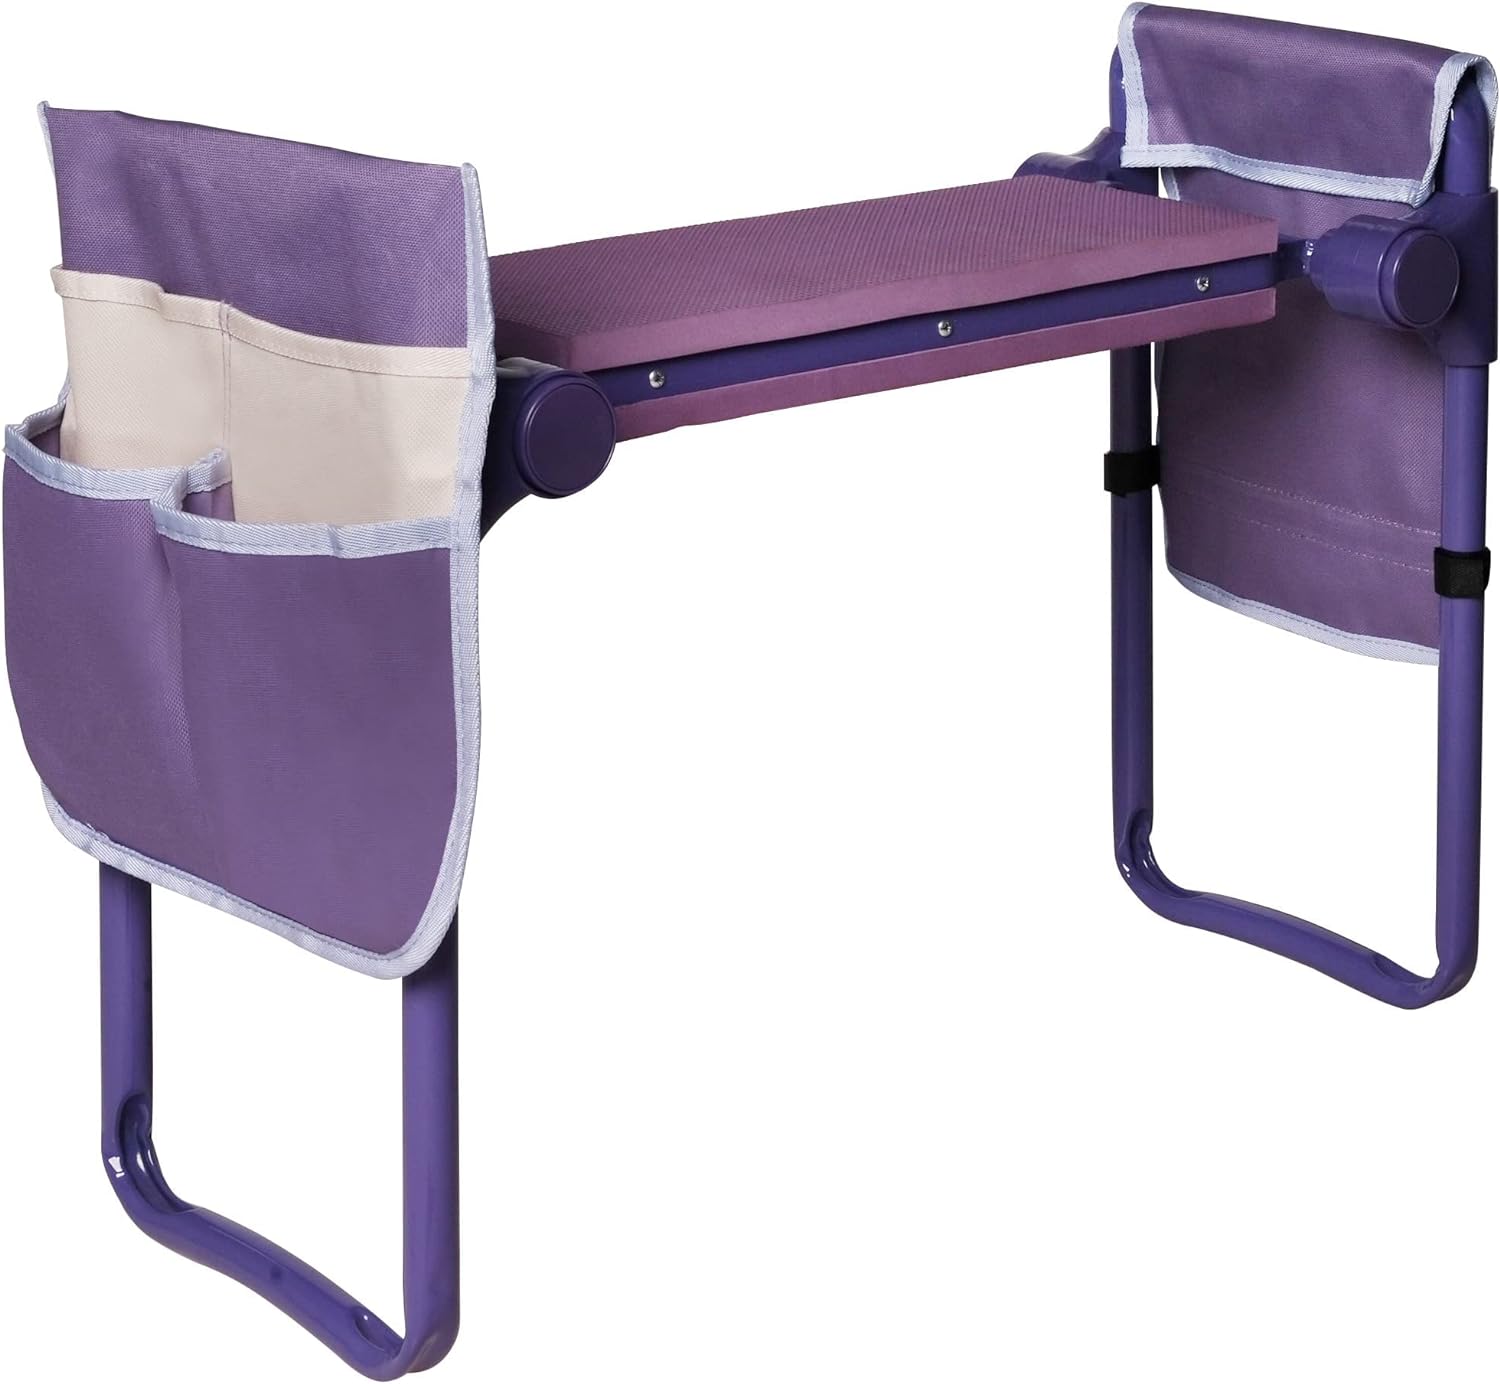 Garden Kneeler and Seat, Foldable Gardening Stool with 2 Tool Pouches, Purple